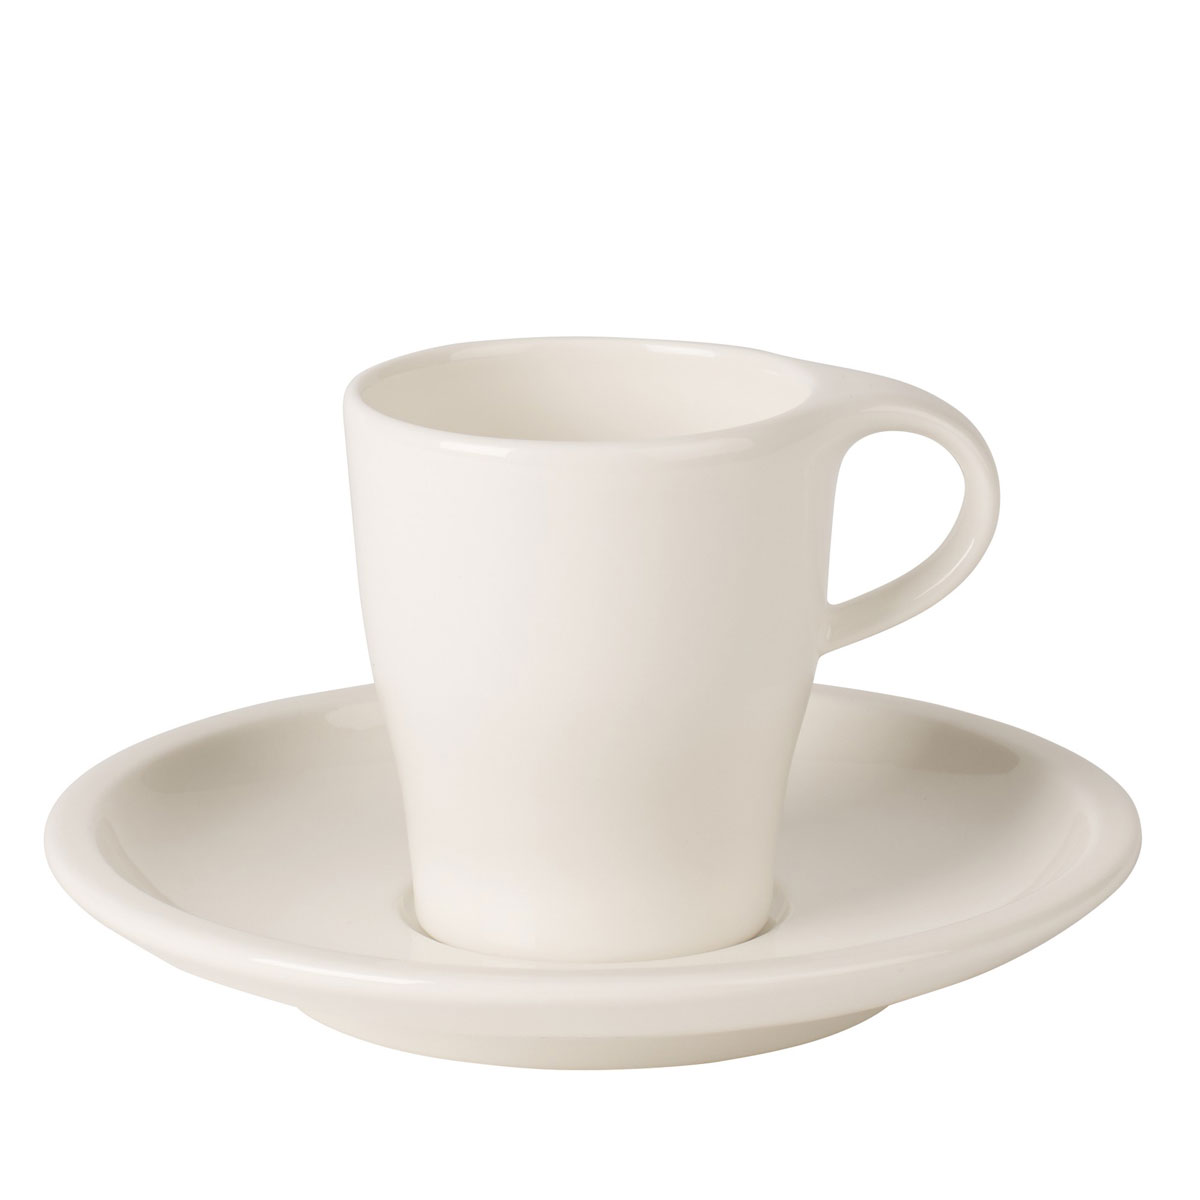 Villeroy and Boch Coffee Passion Espresso Cup and Saucer Set